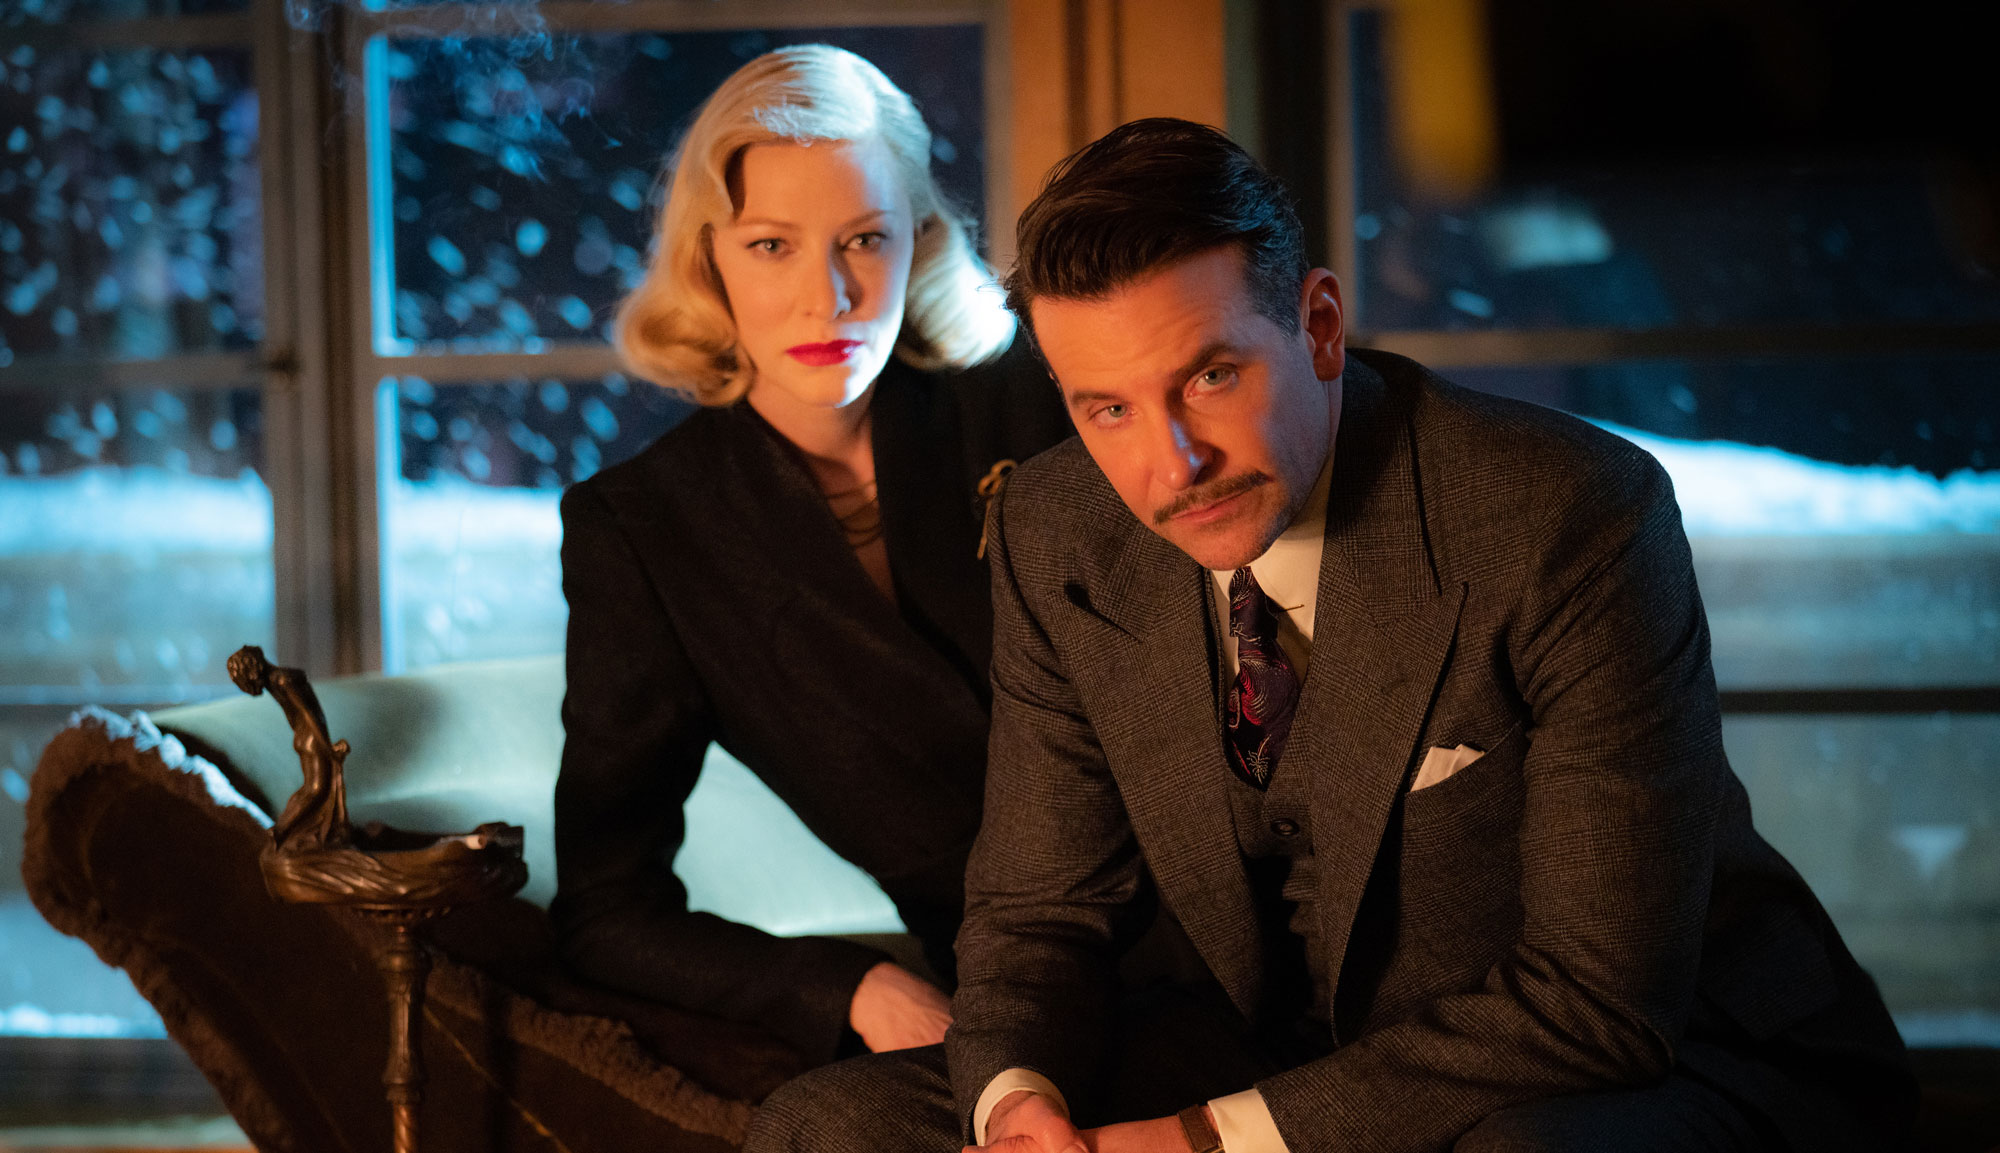 Bradley Cooper and Cate Blanchett in "Nightmare Alley"